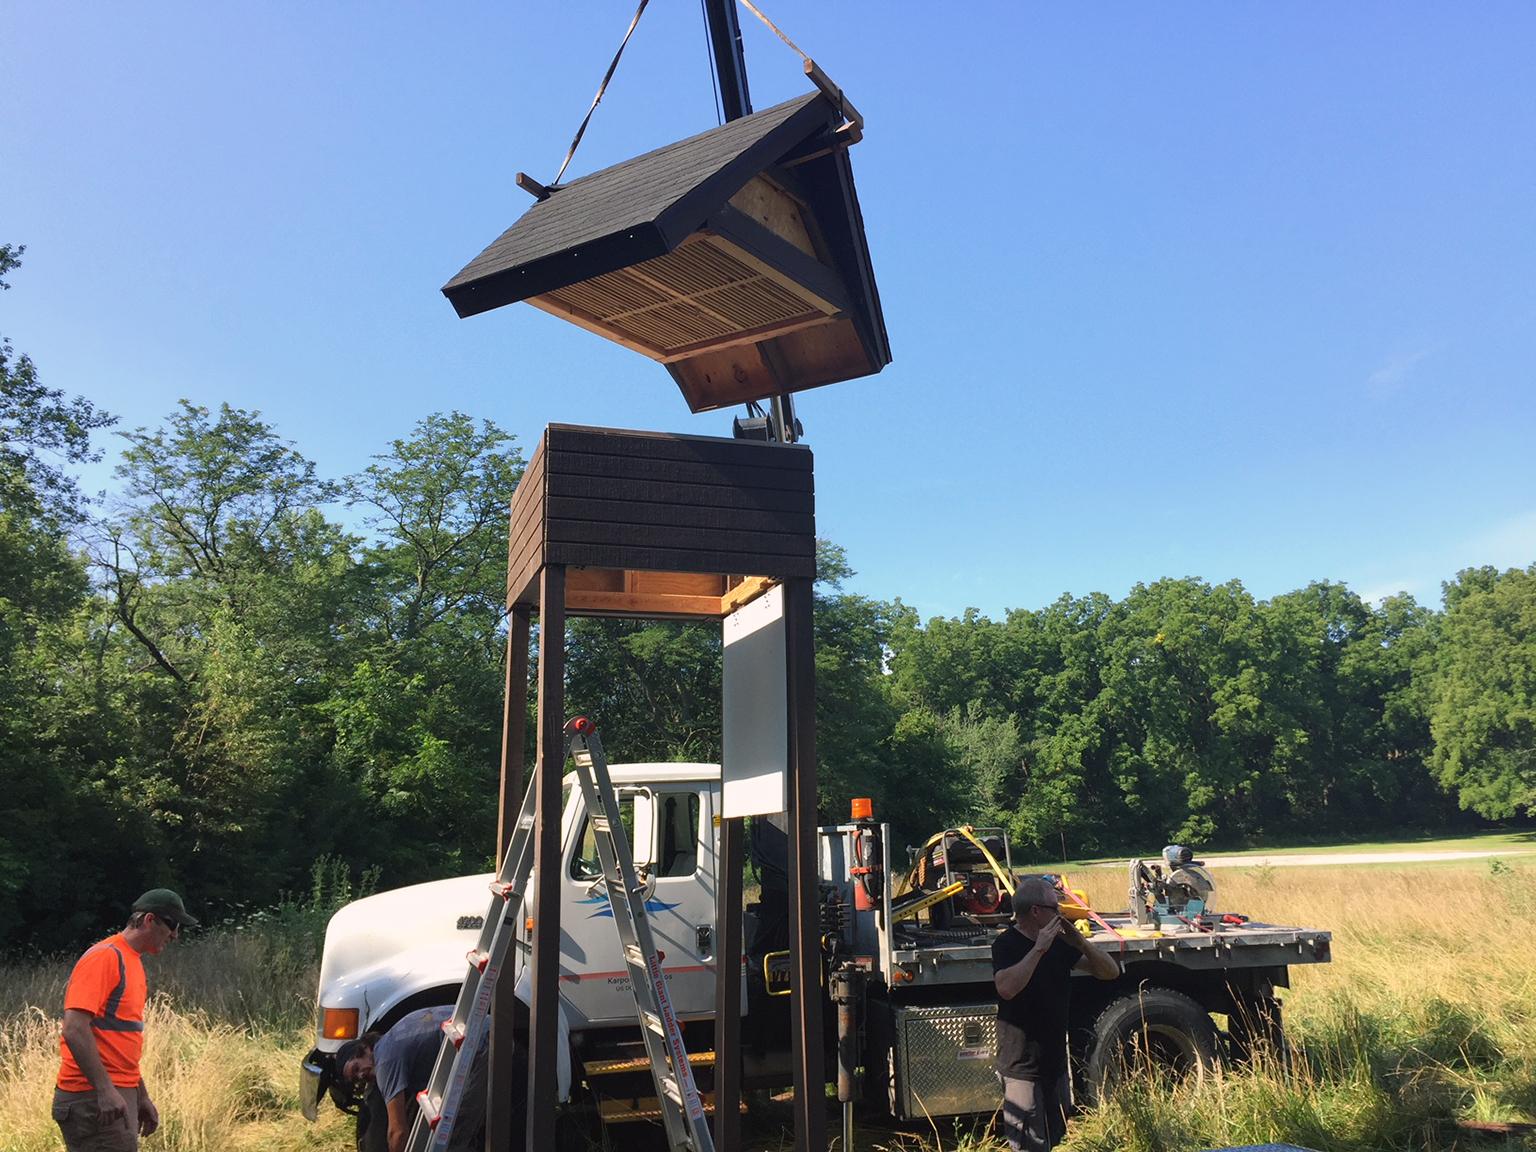 The sixth bat house to be installed in Cook County went up last week at Joe Orr Woods in Chicago Heights. (Courtesy Friends of the Chicago River)